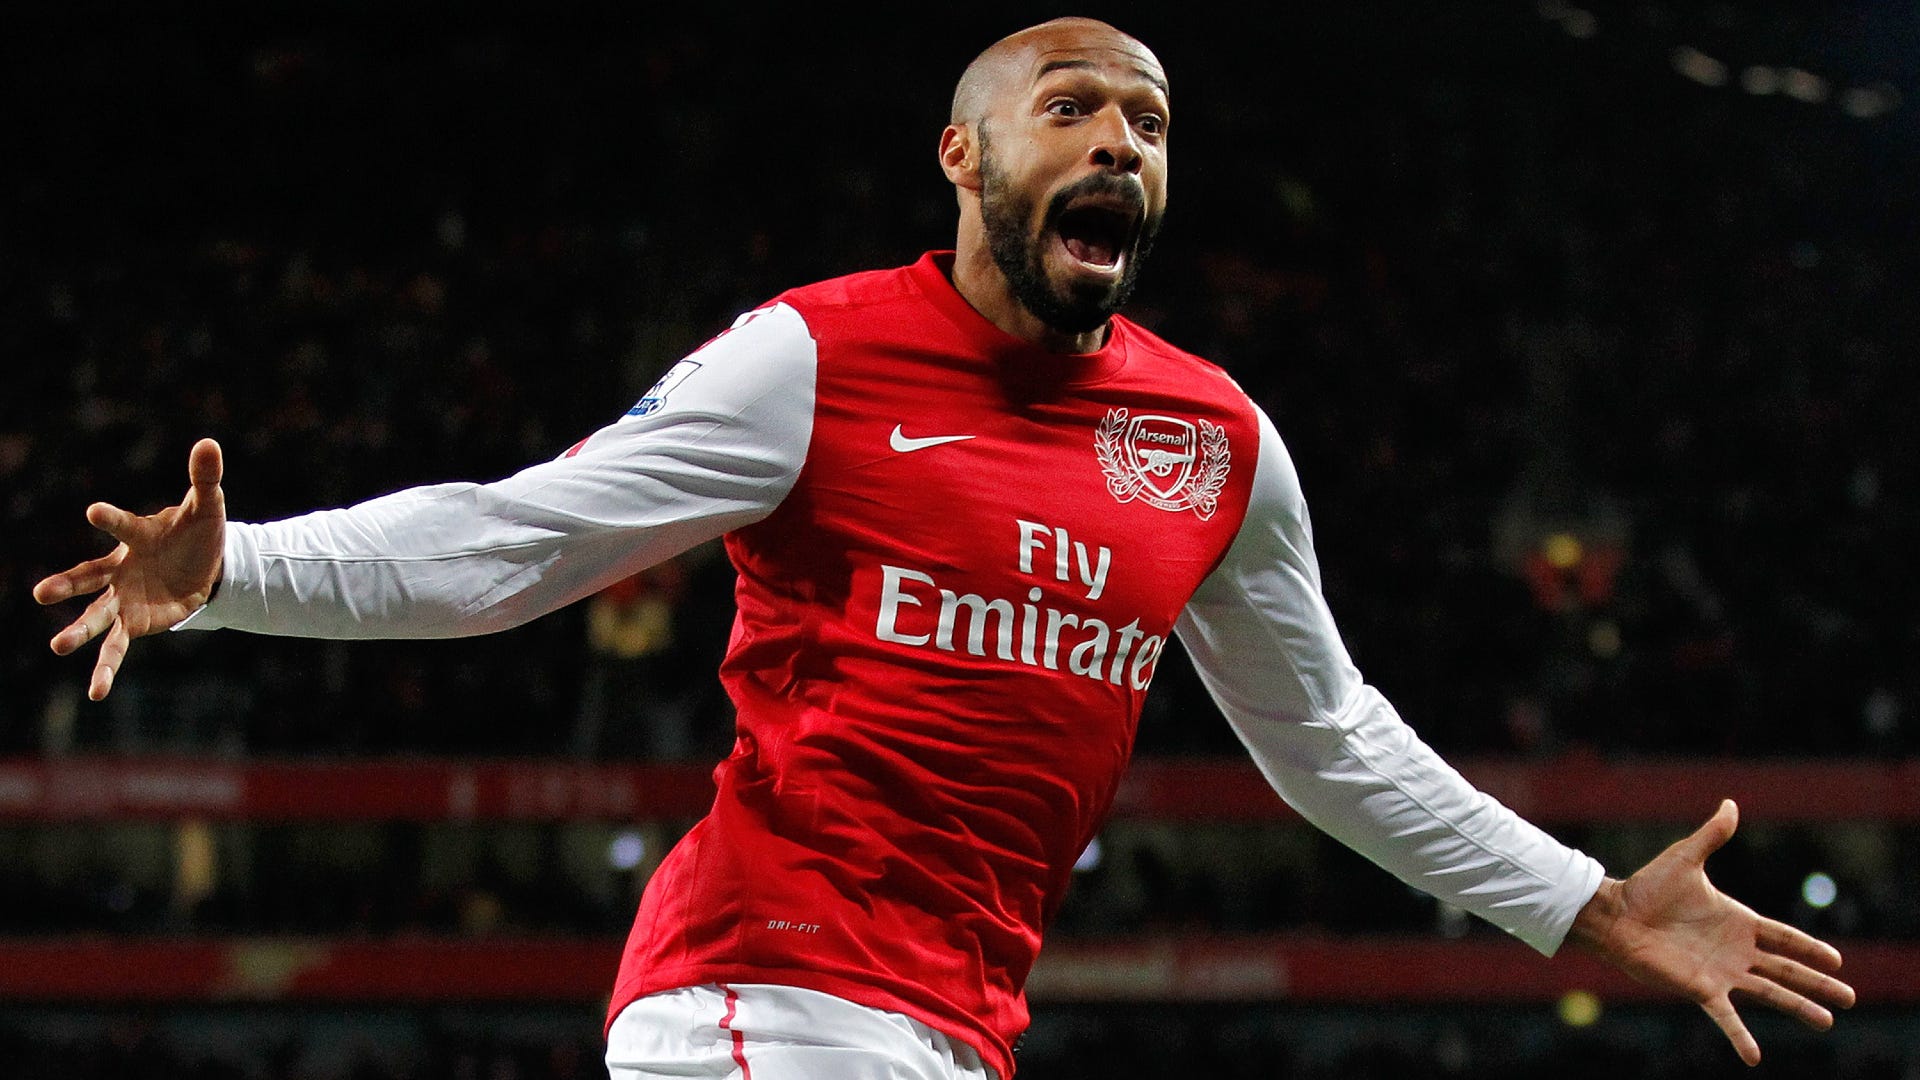 Thierry Henry Arsenal 2011-12